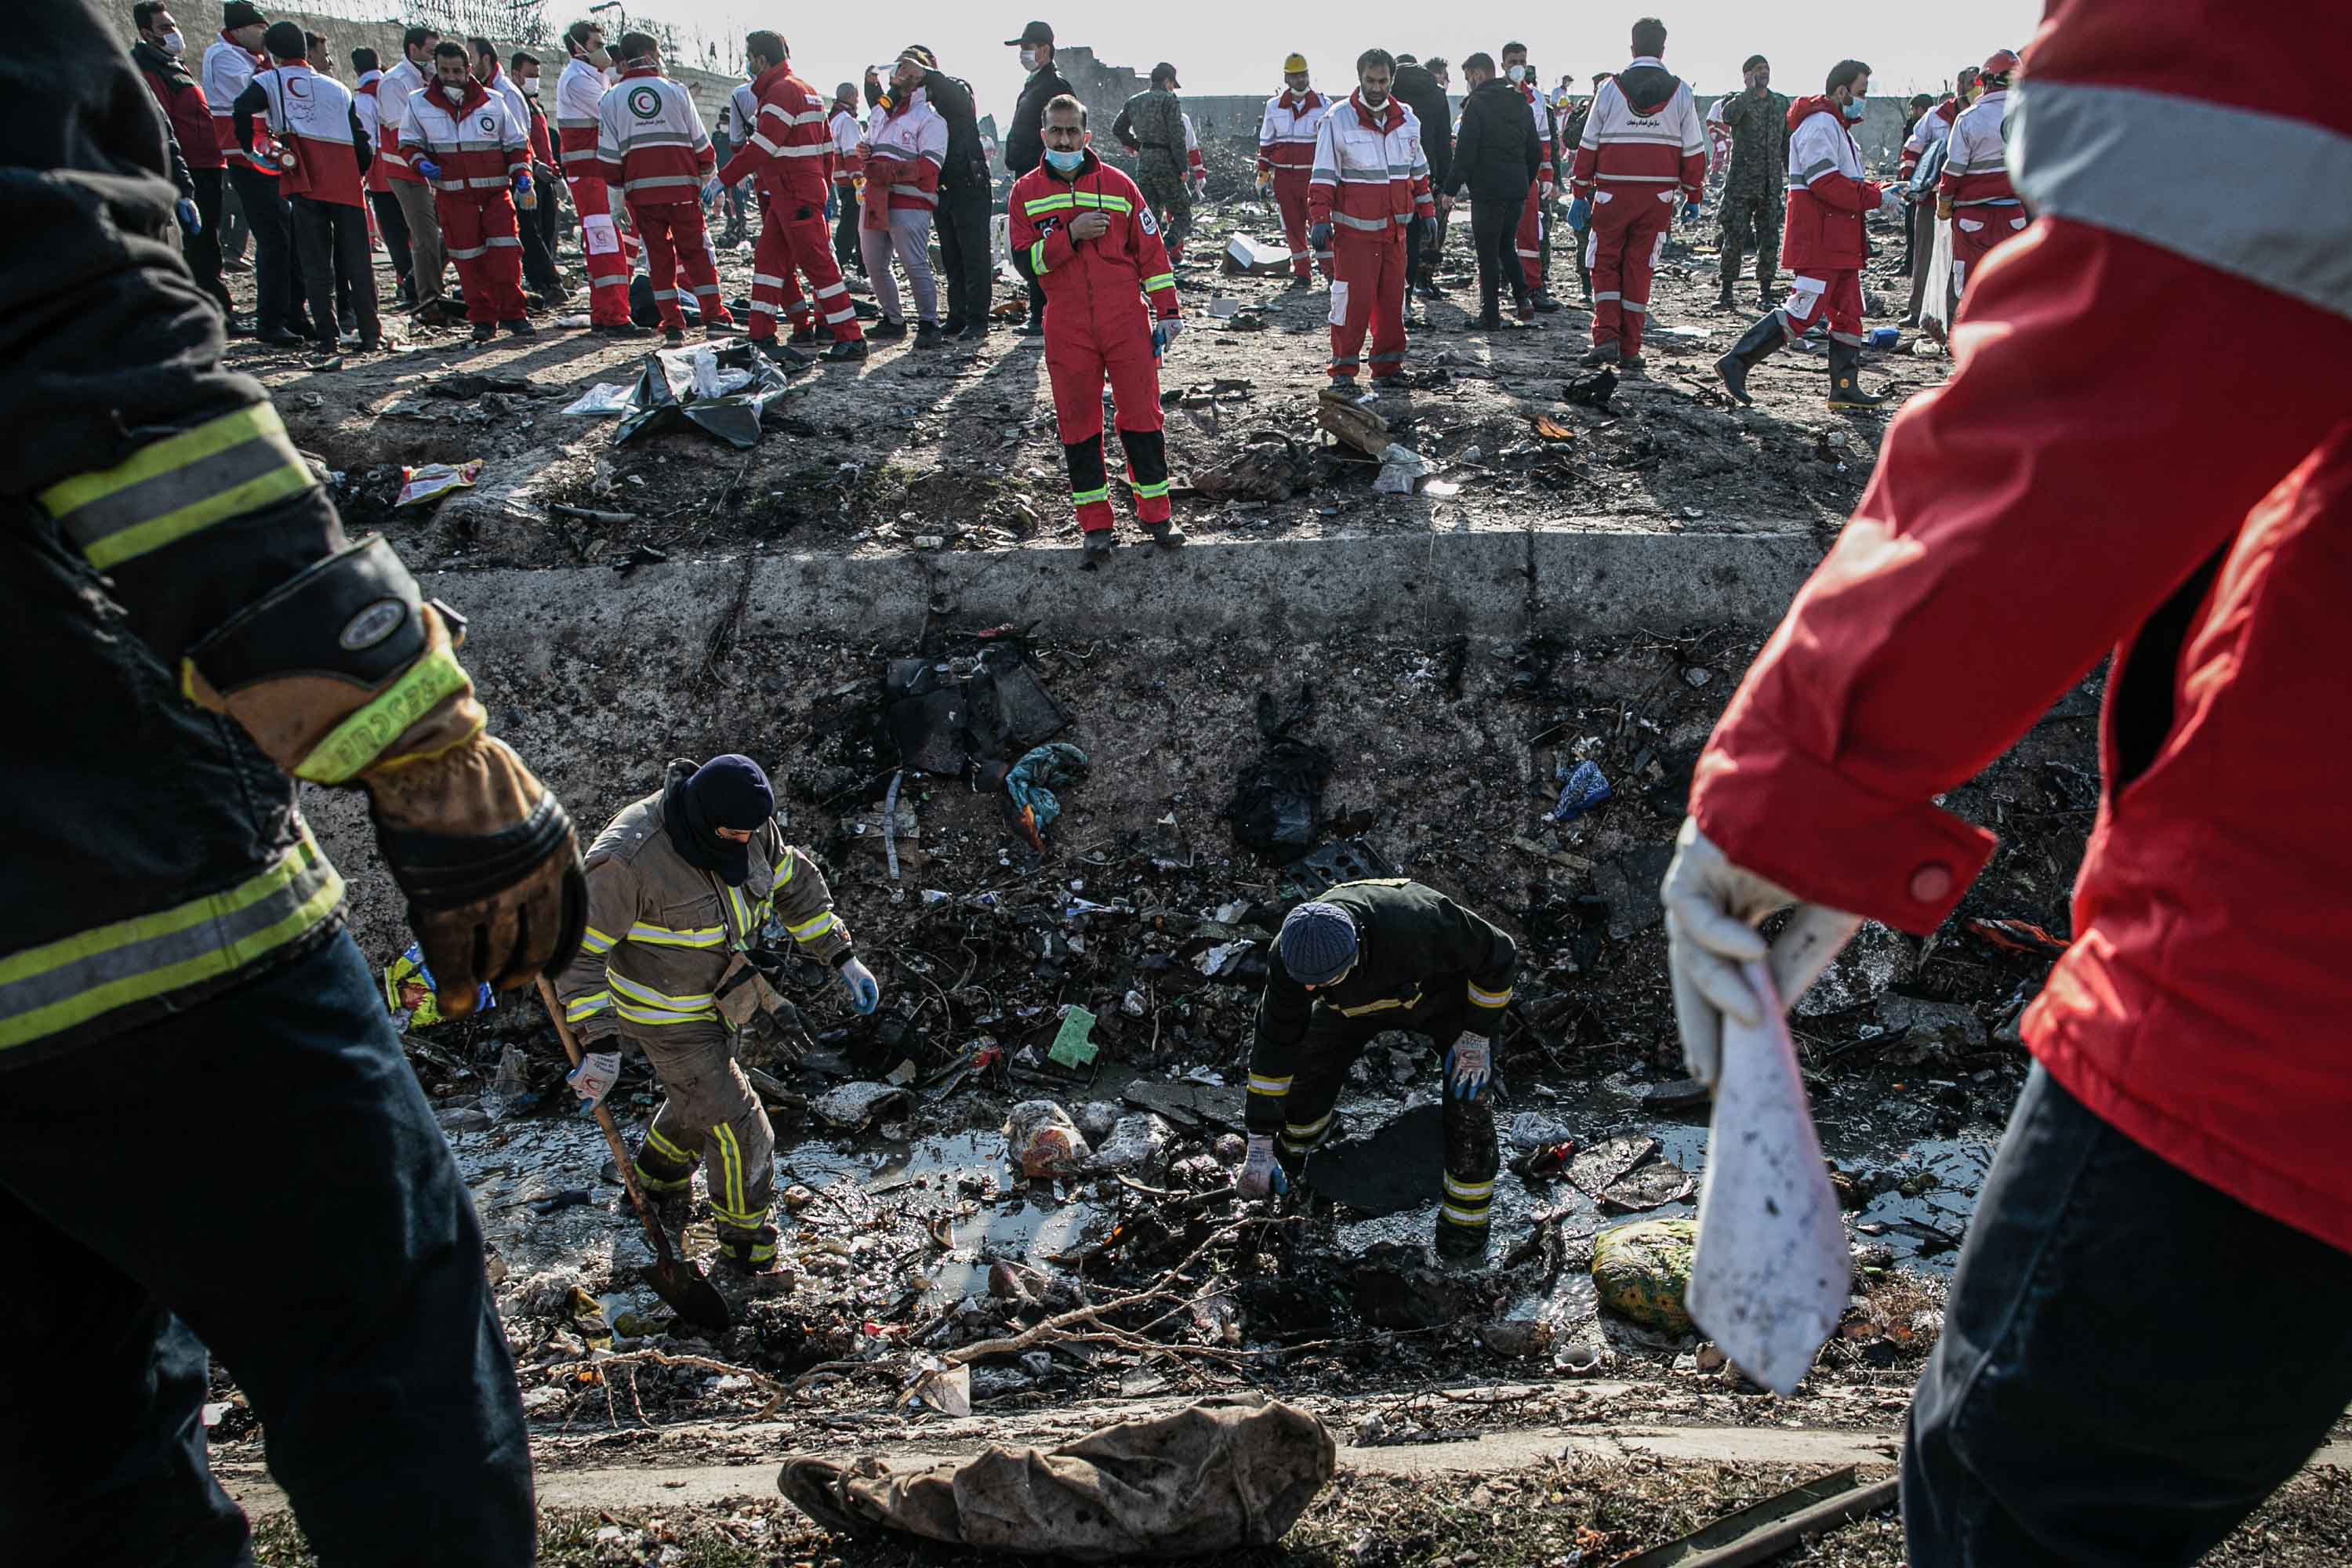 08 January 2020, Iran, Shahedshahr: Rescue workers search the scene, where a Ukrainian airplane carrying 176 people crashed on Wednesday shortly after takeoff from Tehran airport, killing all onboard. Photo: Foad Ashtari/dpa (Photo by Foad Ashtari/picture alliance via Getty Images)